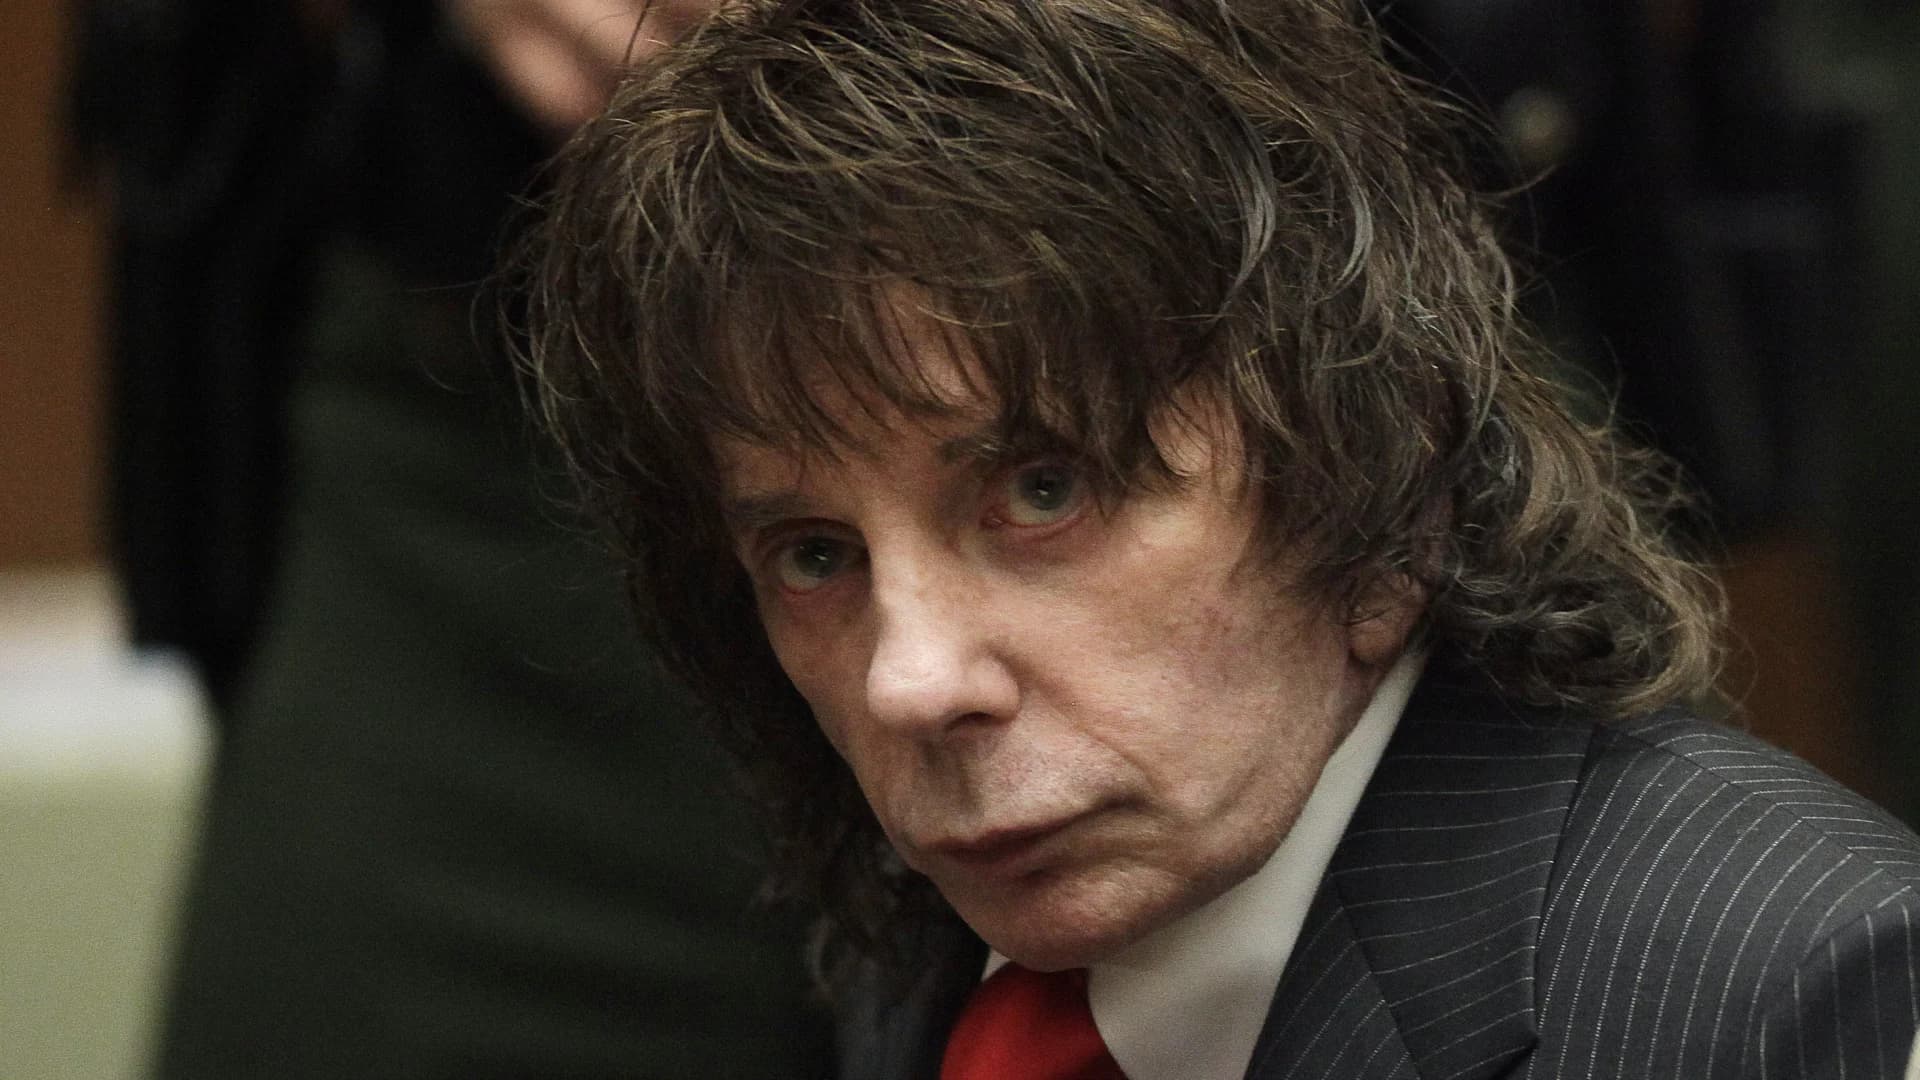 Phil Spector, famed music producer and convicted murderer, dead at 81